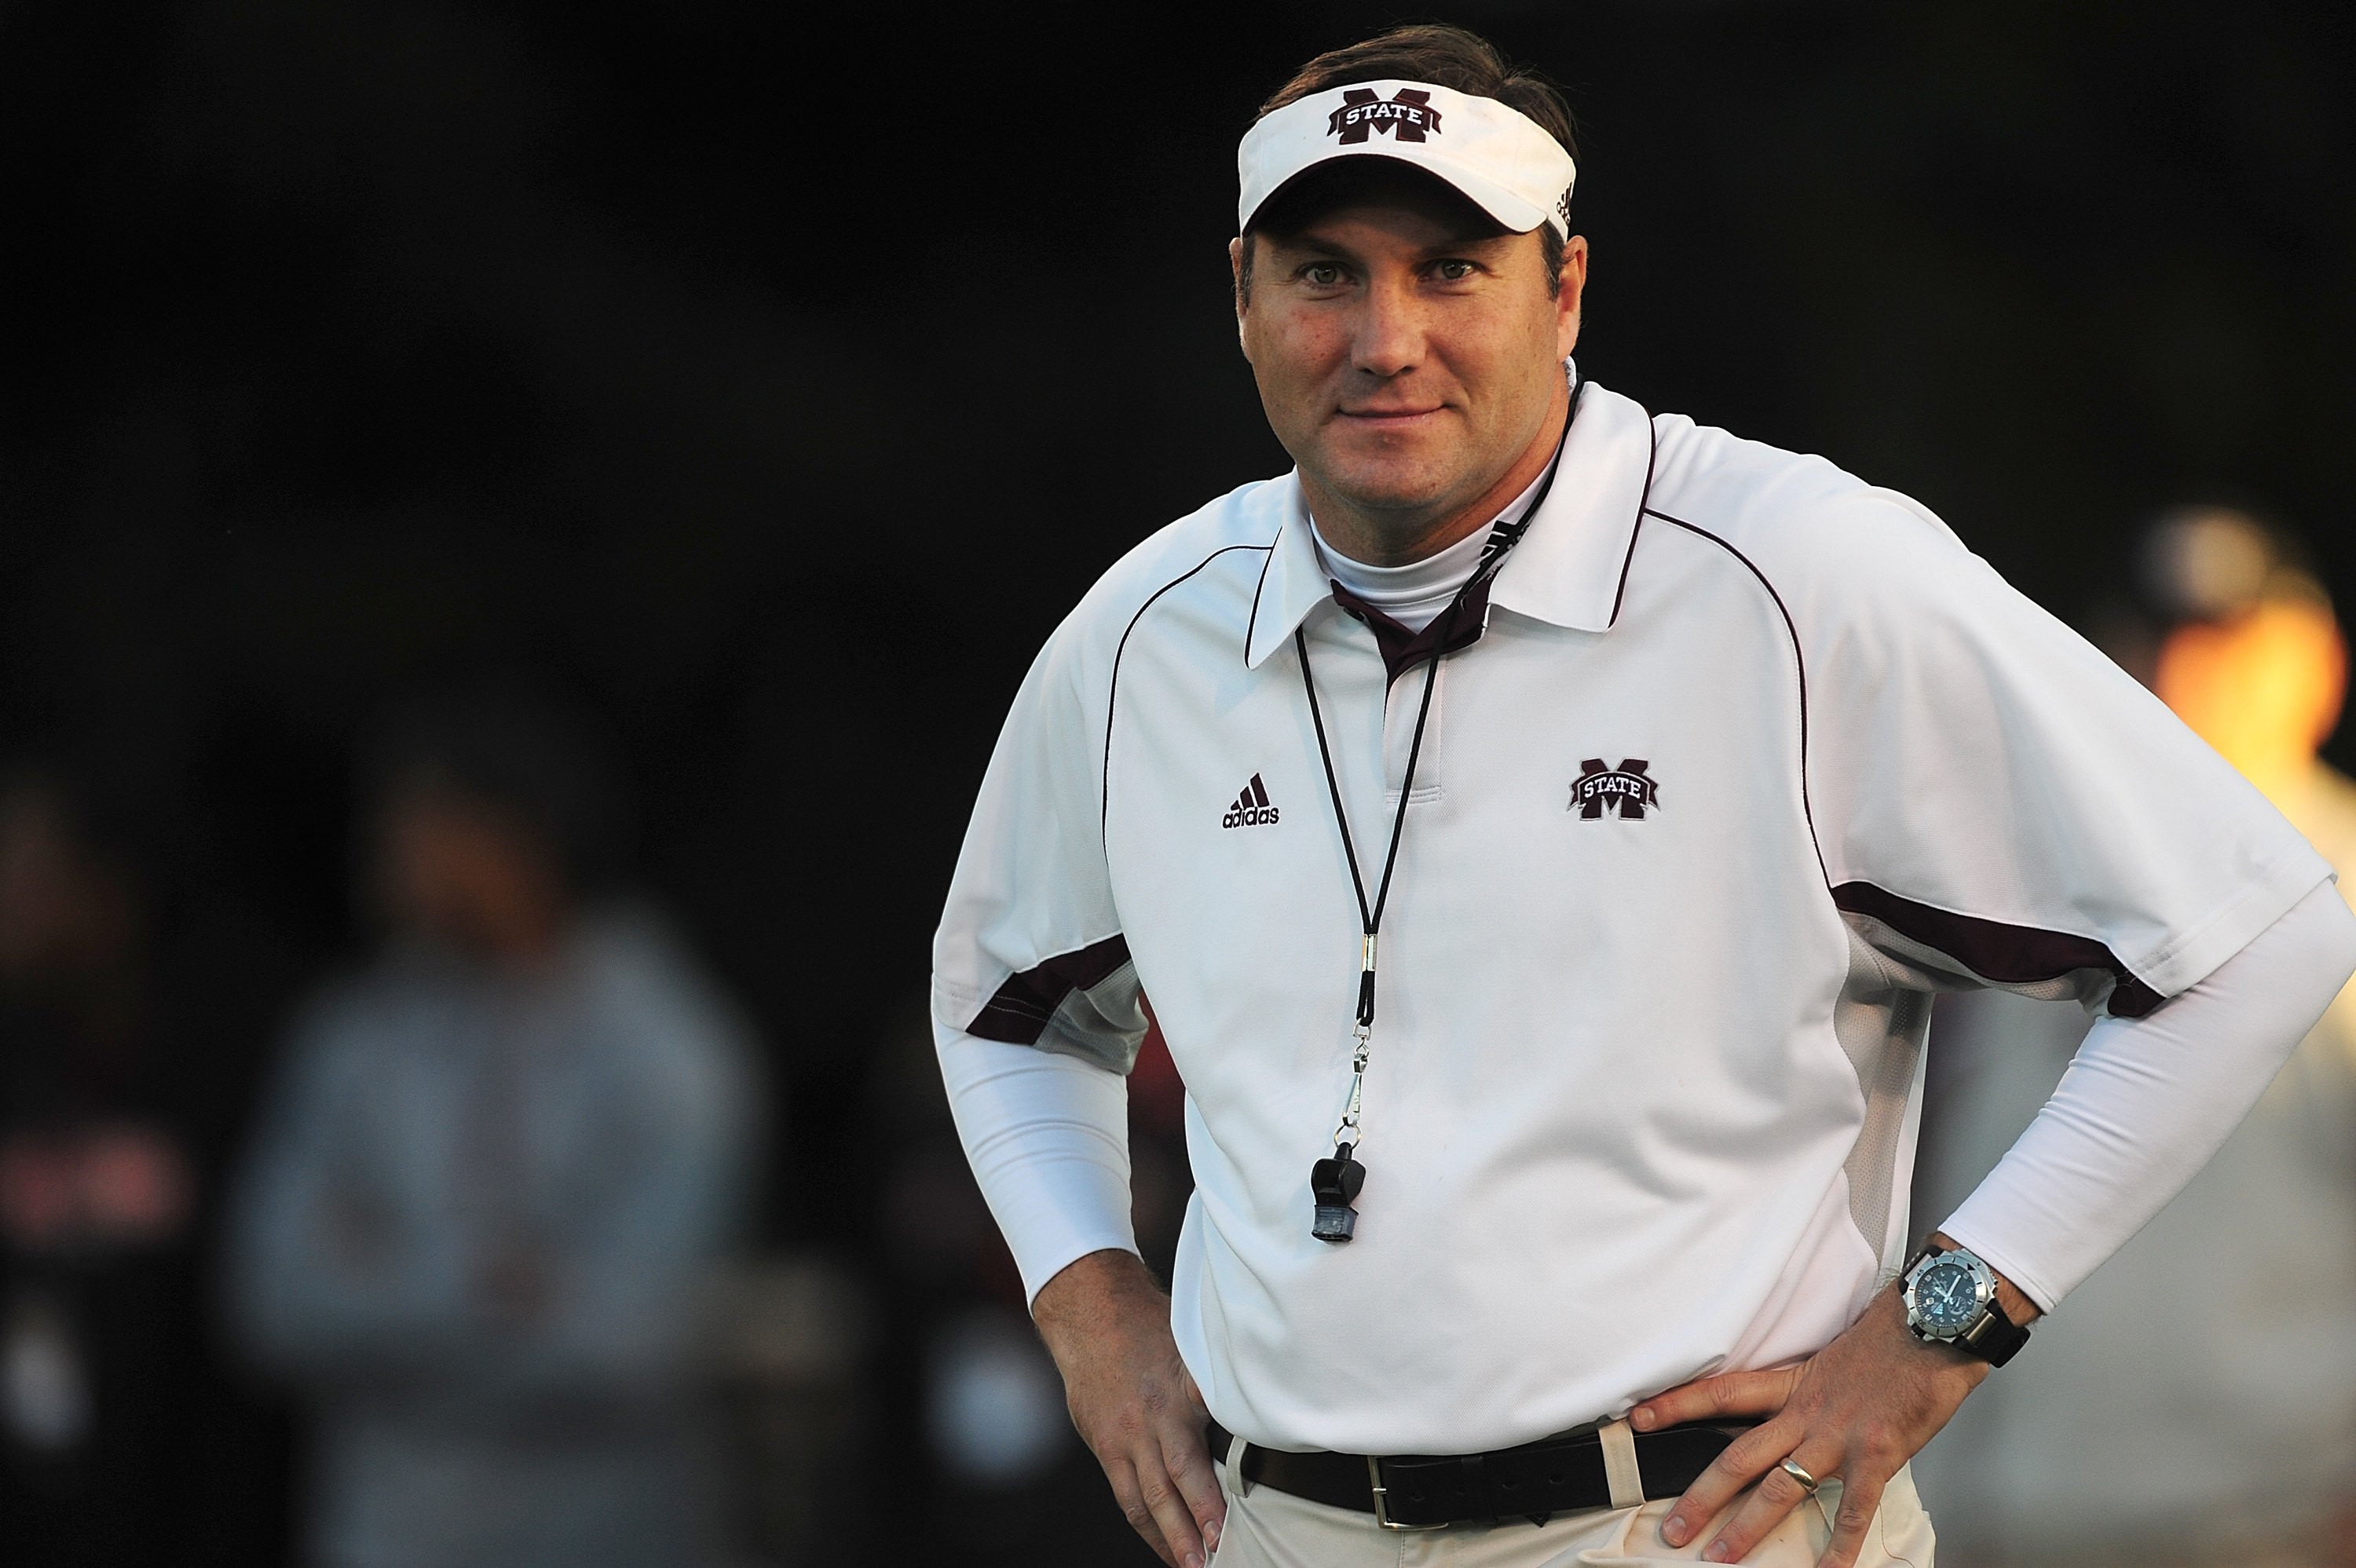 STARKVILLE, MS - OCTOBER 24:  Head coach Dan Mullen of the Mississippi State Bulldogs, during pre game warm up against the Florida Gators, at Davis Wade Stadium on  October 24, 2009 in Starkville, Mississippi  (Photo by Rick Dole/Getty Images)